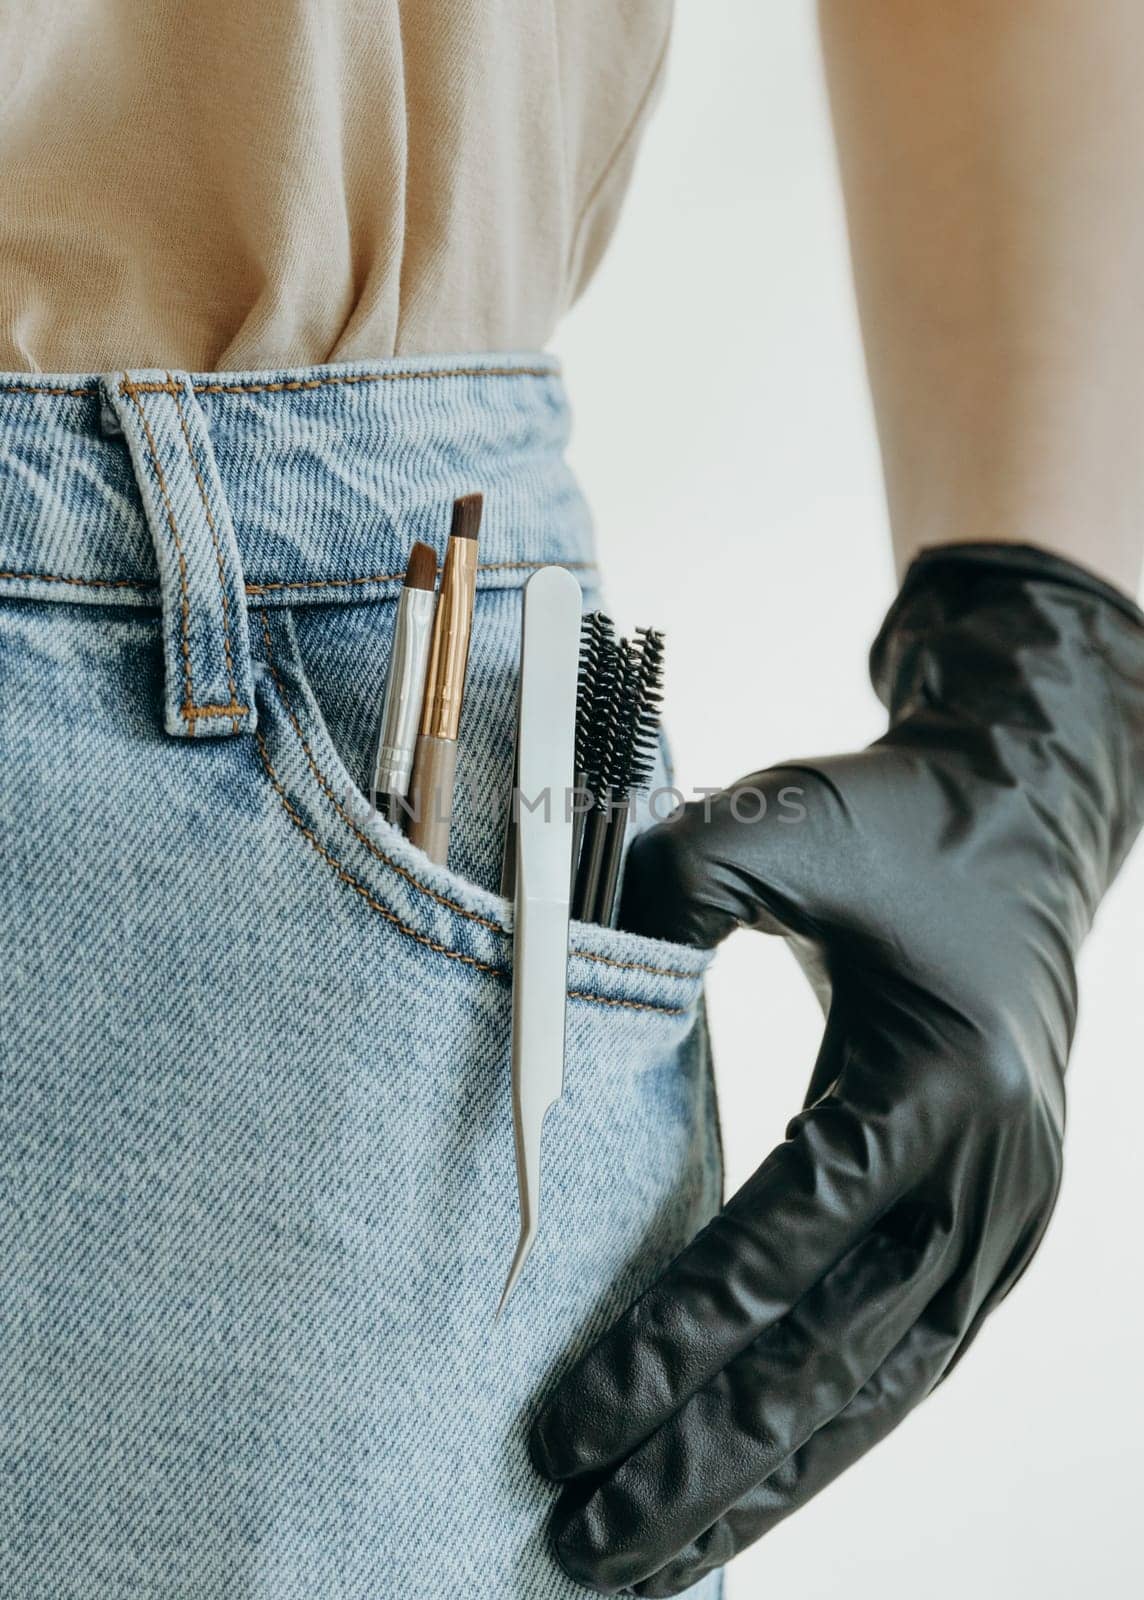 A set of brushes, tweezers and brushes for eyelash extensions stick out from the left pocket of blue jeans with a girl s hand in black gloves, close-up side view.